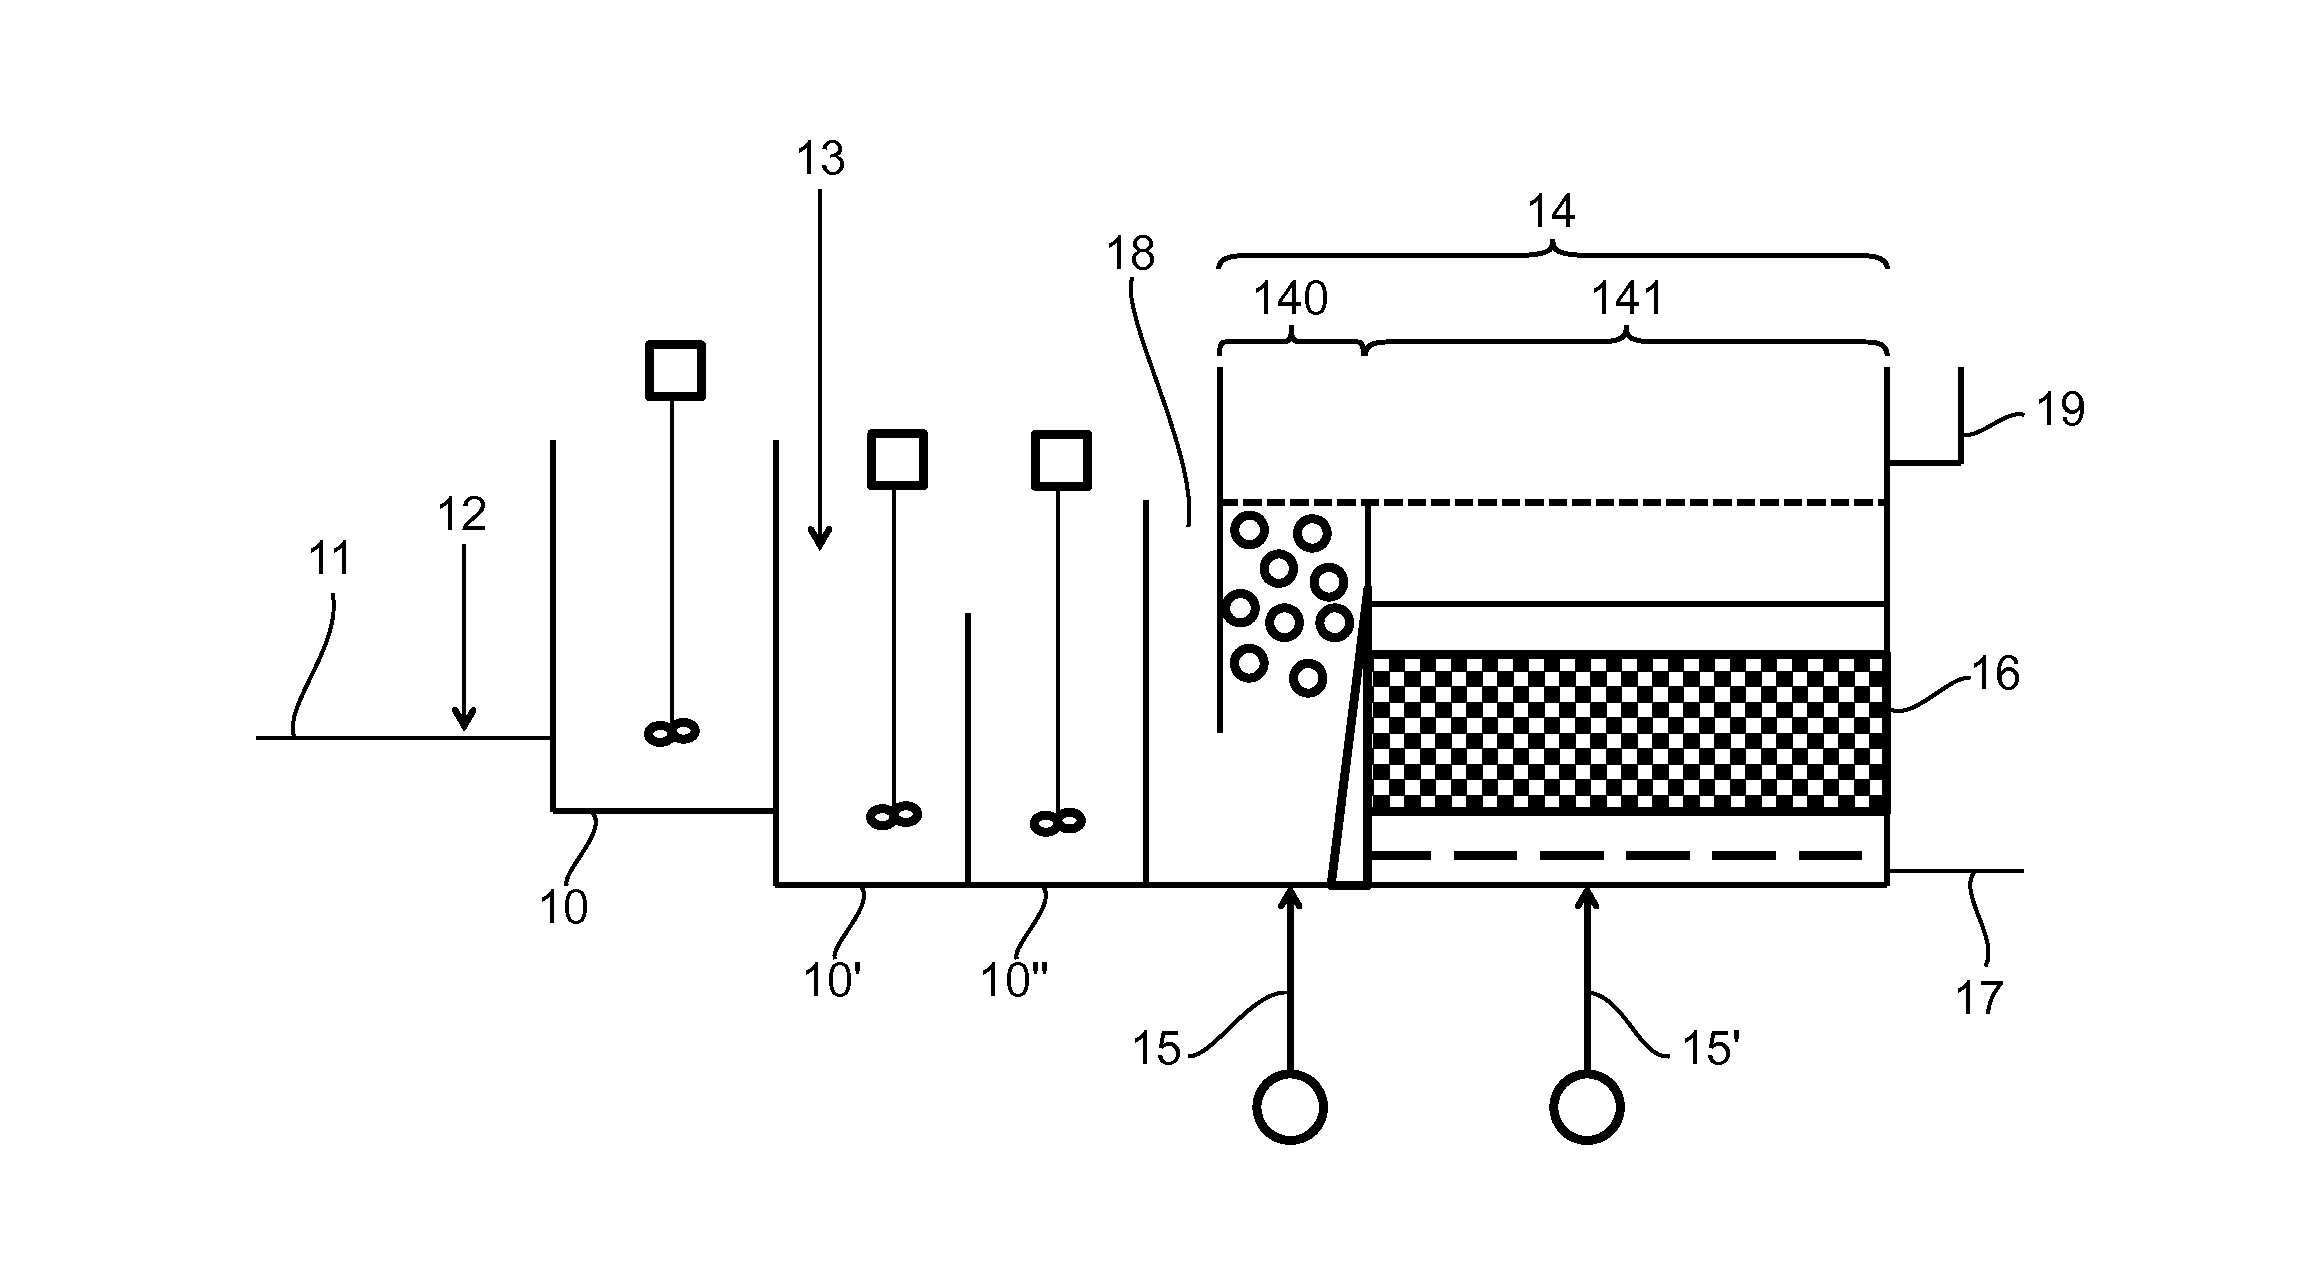 Water treatment process comprising floatation combined with gravity filtration, and corresponding equipment